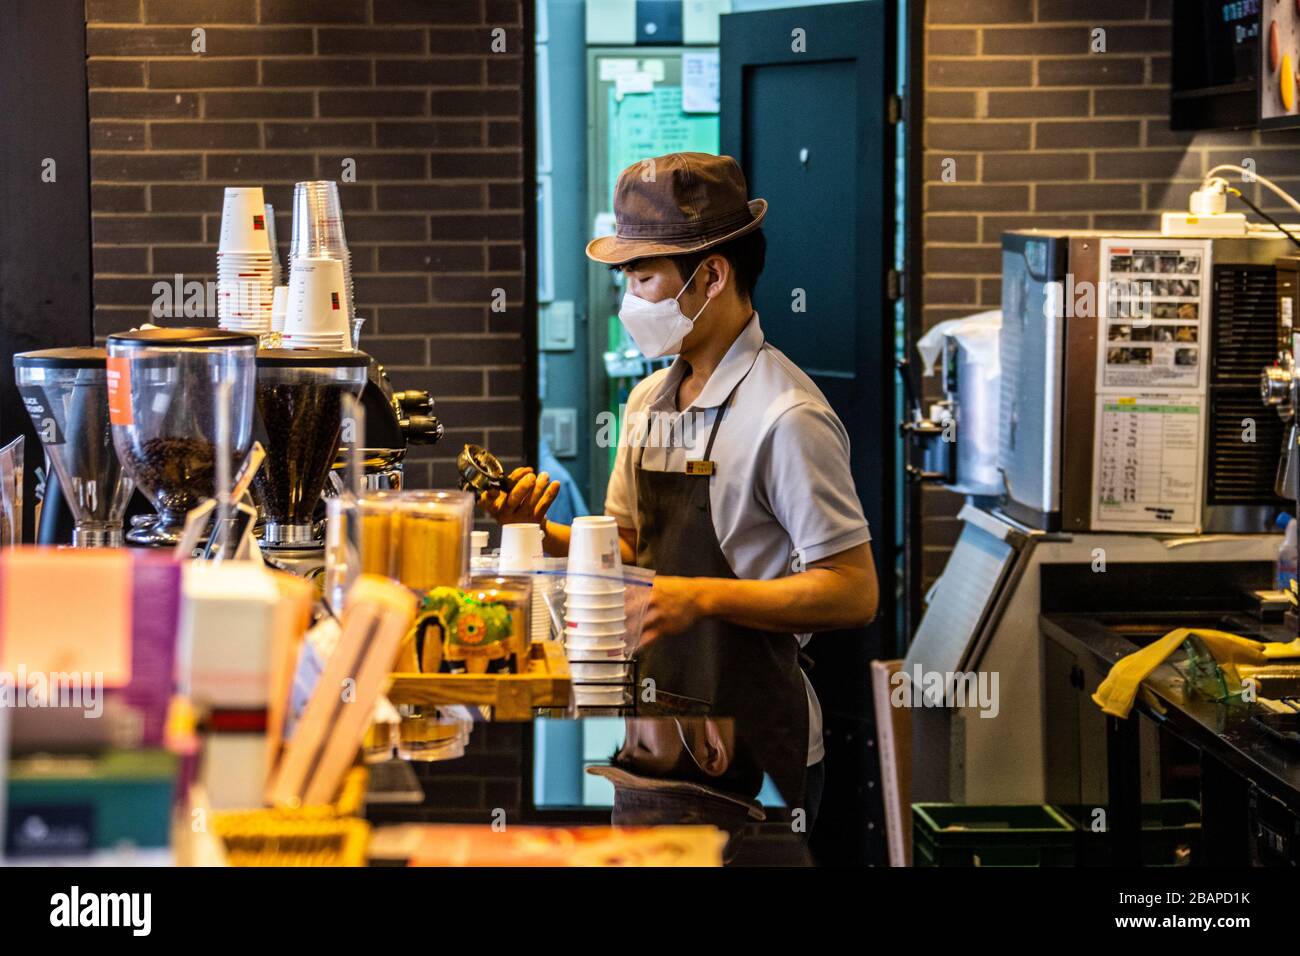 Barista at Twosome Place cafe wearing a mask during the Coronavirus pandemic, Seoul, South Korea Stock Photo